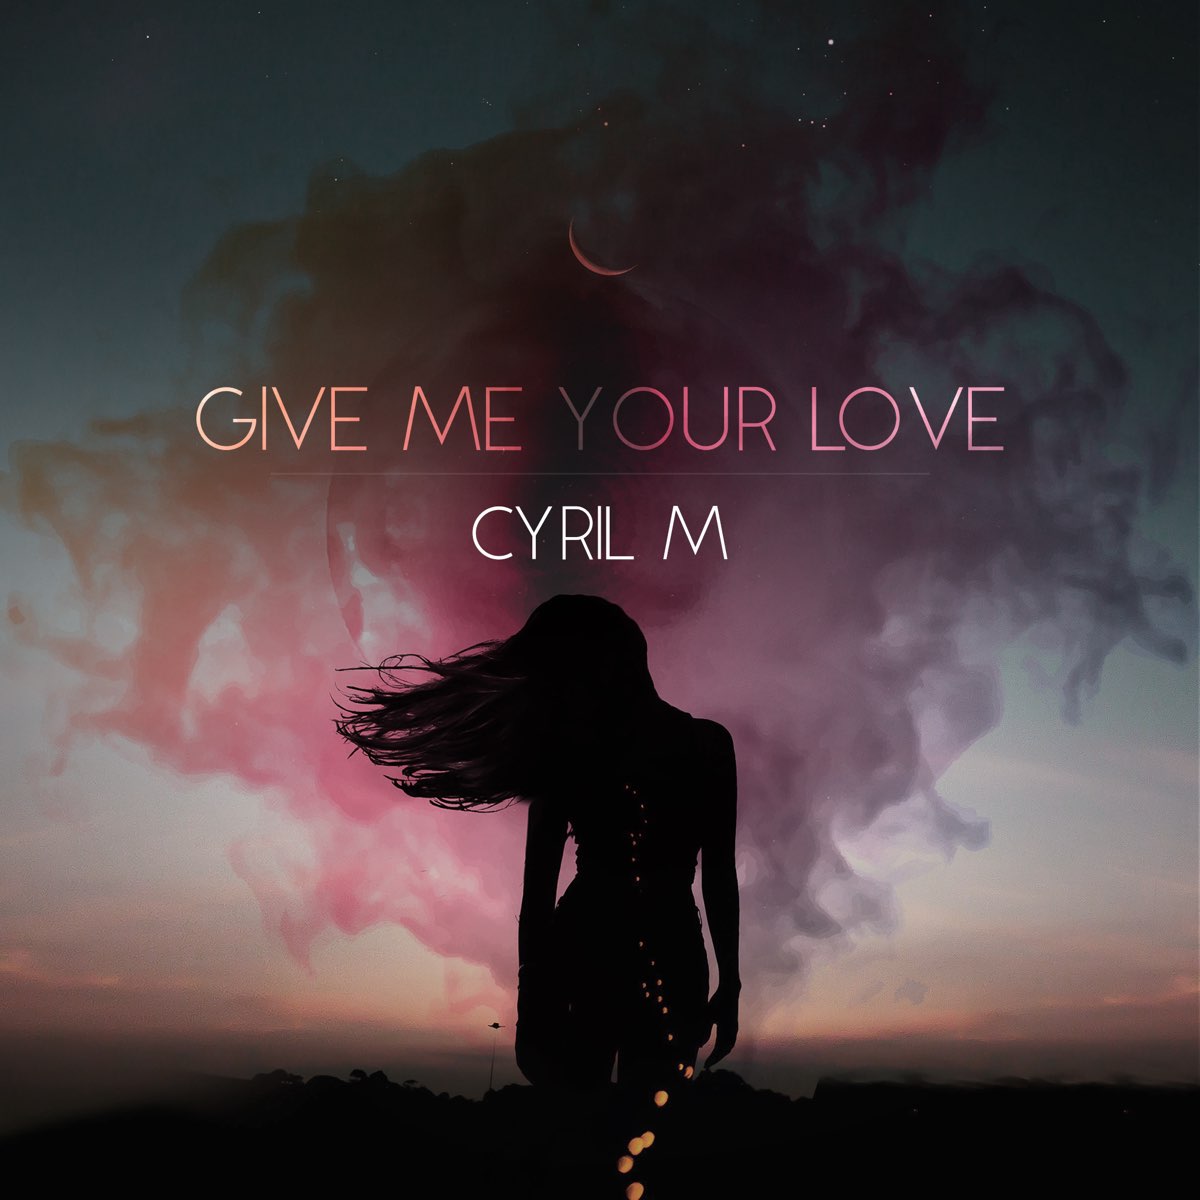 The sound of silence cyril remix слушать. Give me. Give me your Love. Cyril Remix. Your Love Remix.